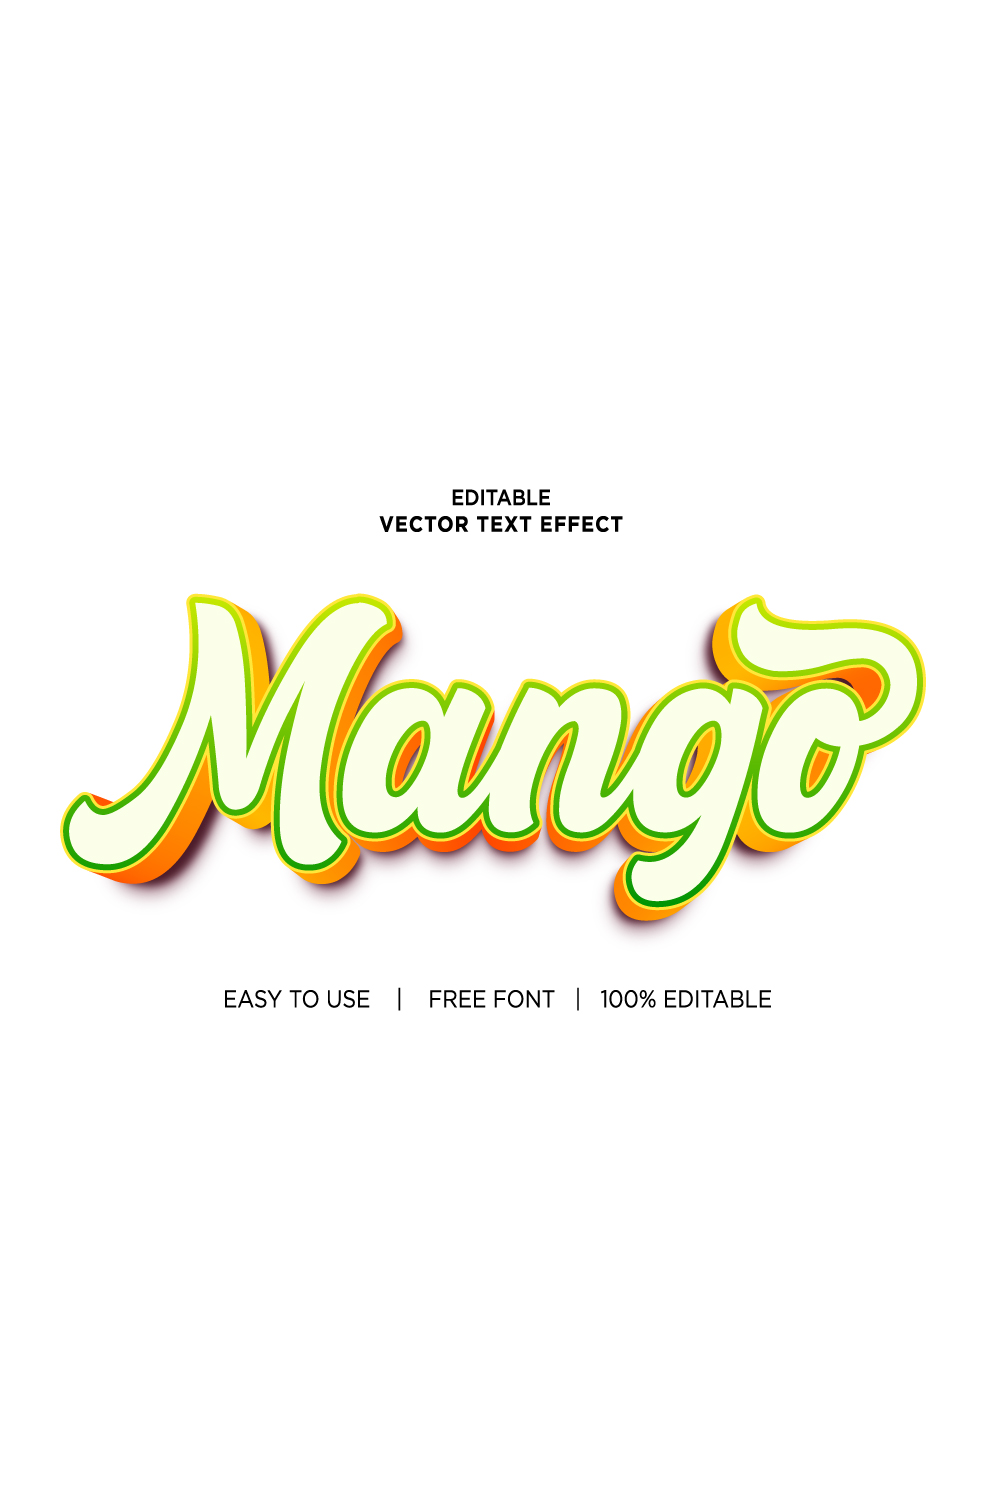 Mango 3d text effects vector illustrations New Text style eps files Editable text effect vector, 3d editable text effect vector, editable font effect vector, text effect vector, pinterest preview image.